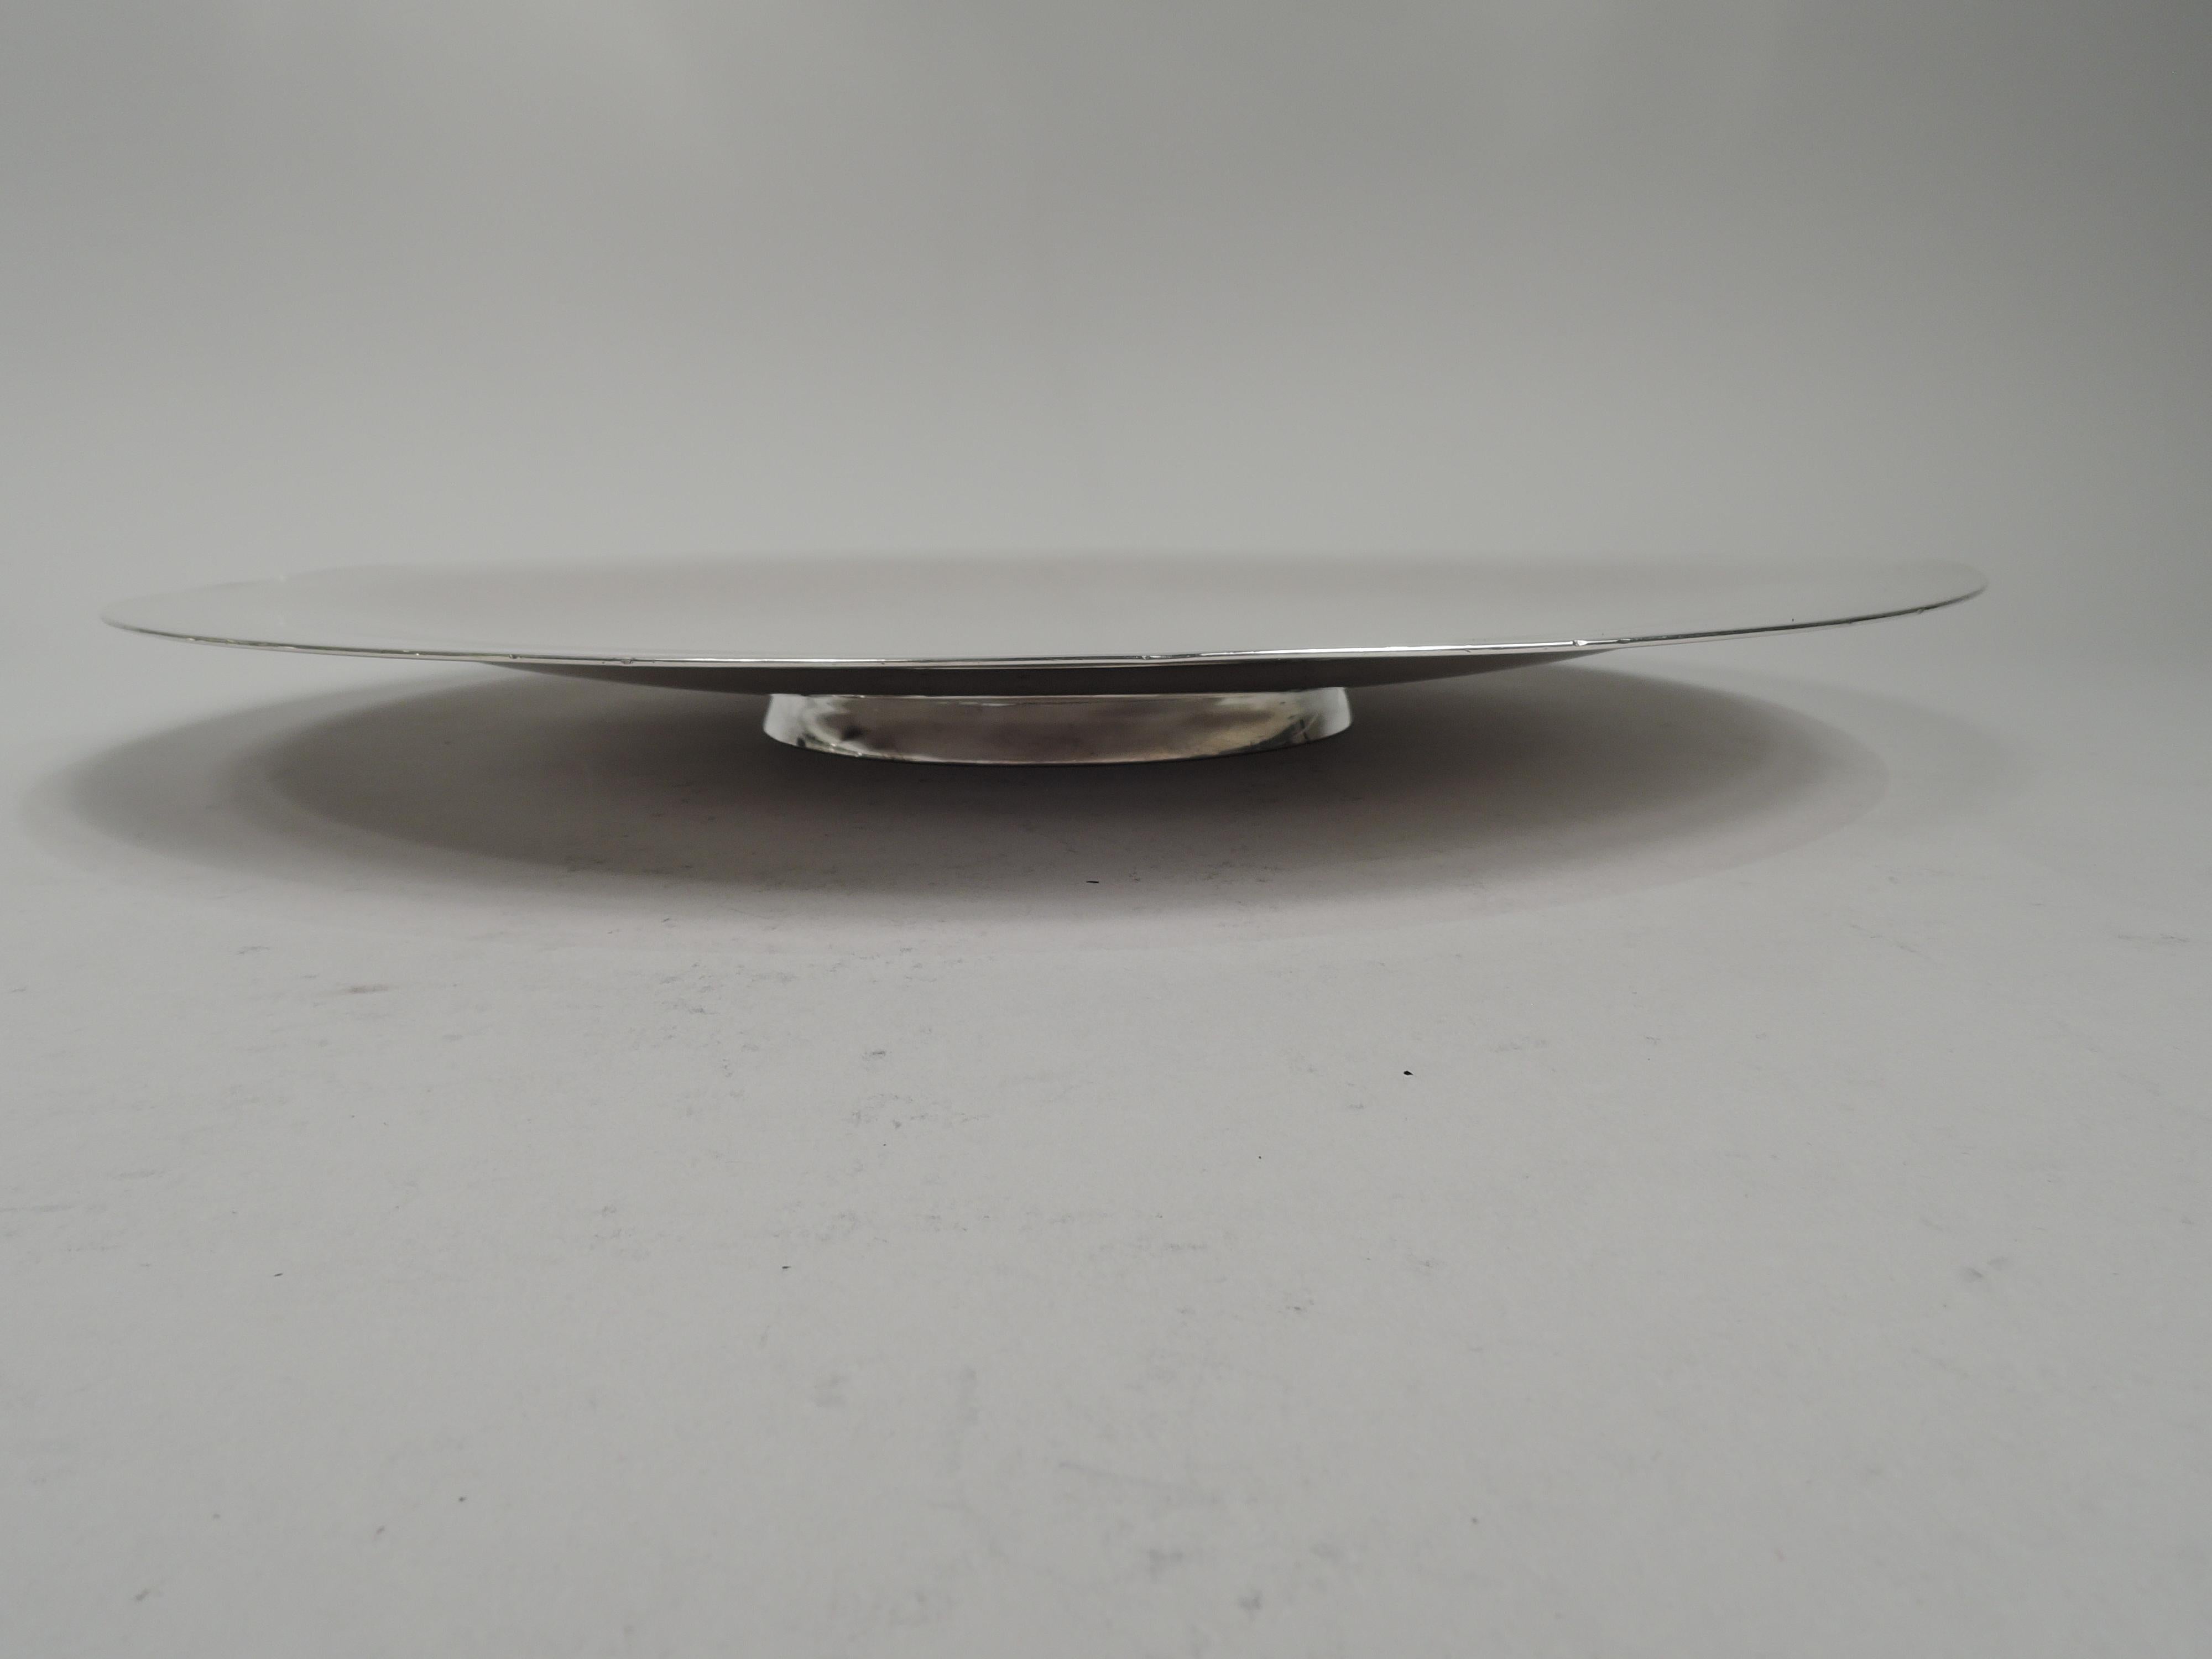 Mid-Century Modern sterling silver serving plate. Made by International Silver Co. in Meriden, Conn. Round with shallow integral well. Short and spread foot. Stark and functional. Fully marked including maker’s stamp and no. AH6269L. Heavy weight: